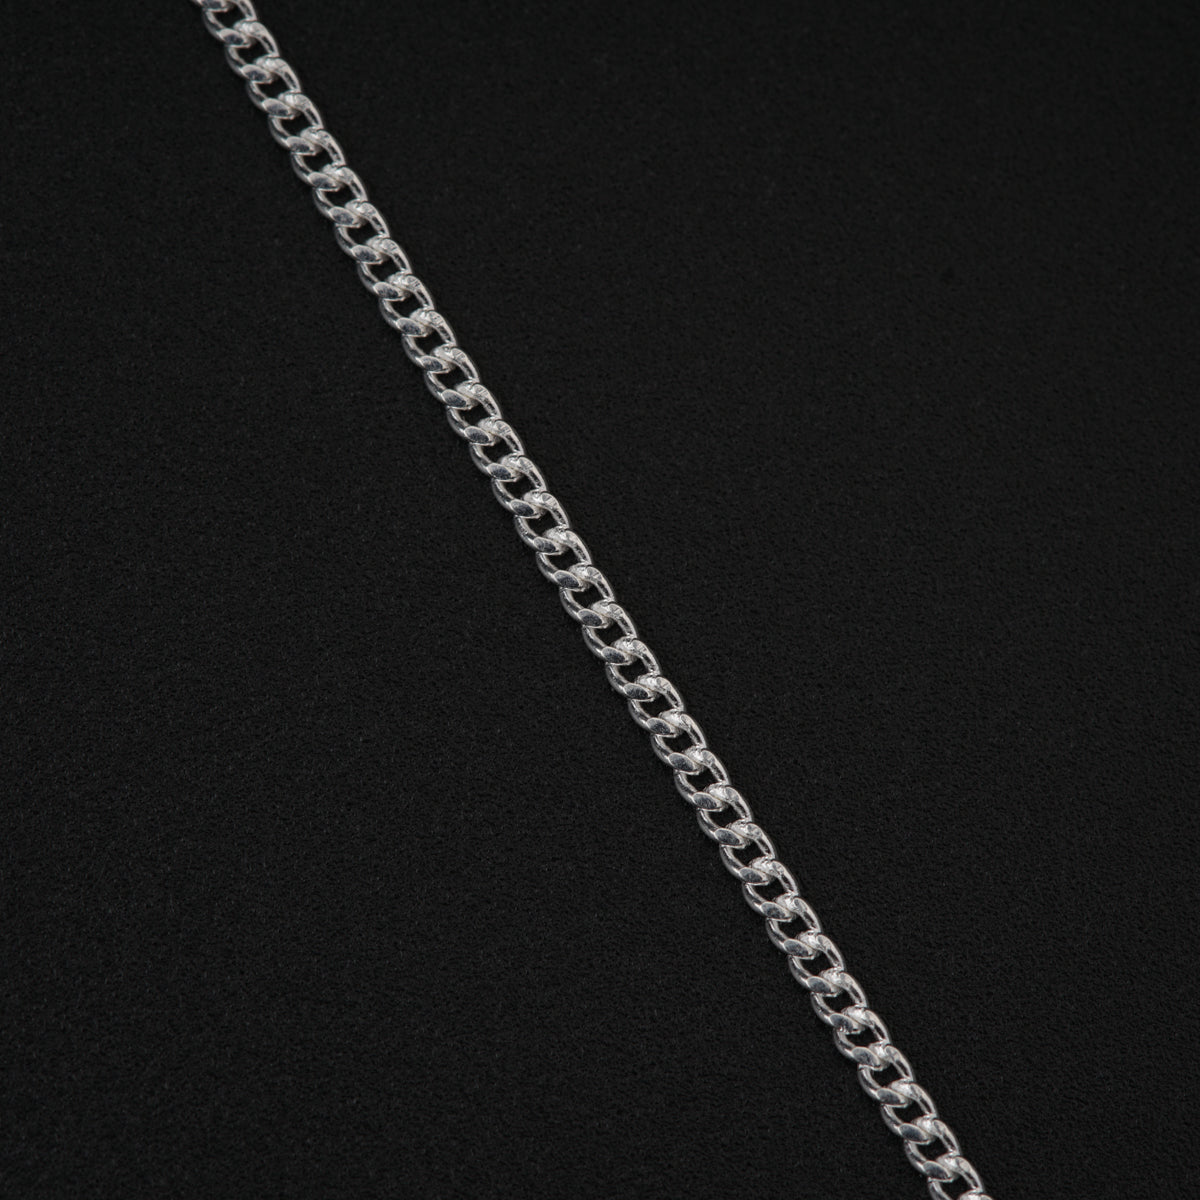 Daily Wear Silver Hammered Diamond Shape Mangalsutra